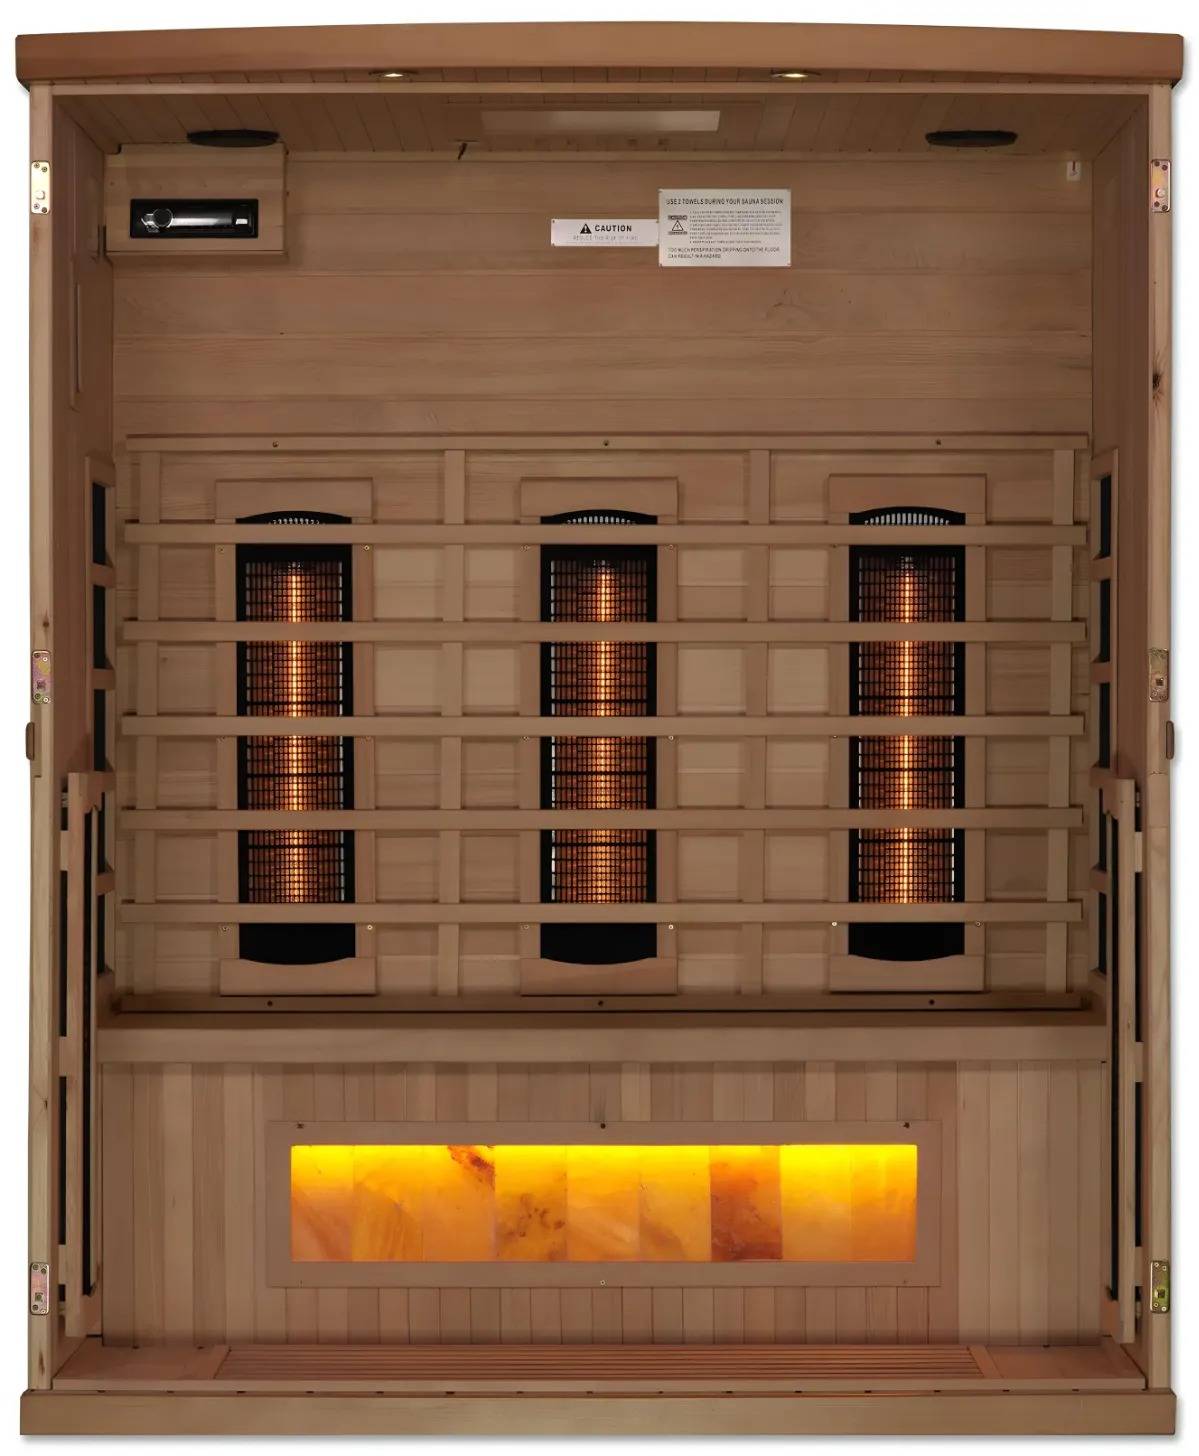 ZiahCare's Golden Designs 3 Person Full Spectrum Infrared Sauna Reserve Edition Mockup Image 2